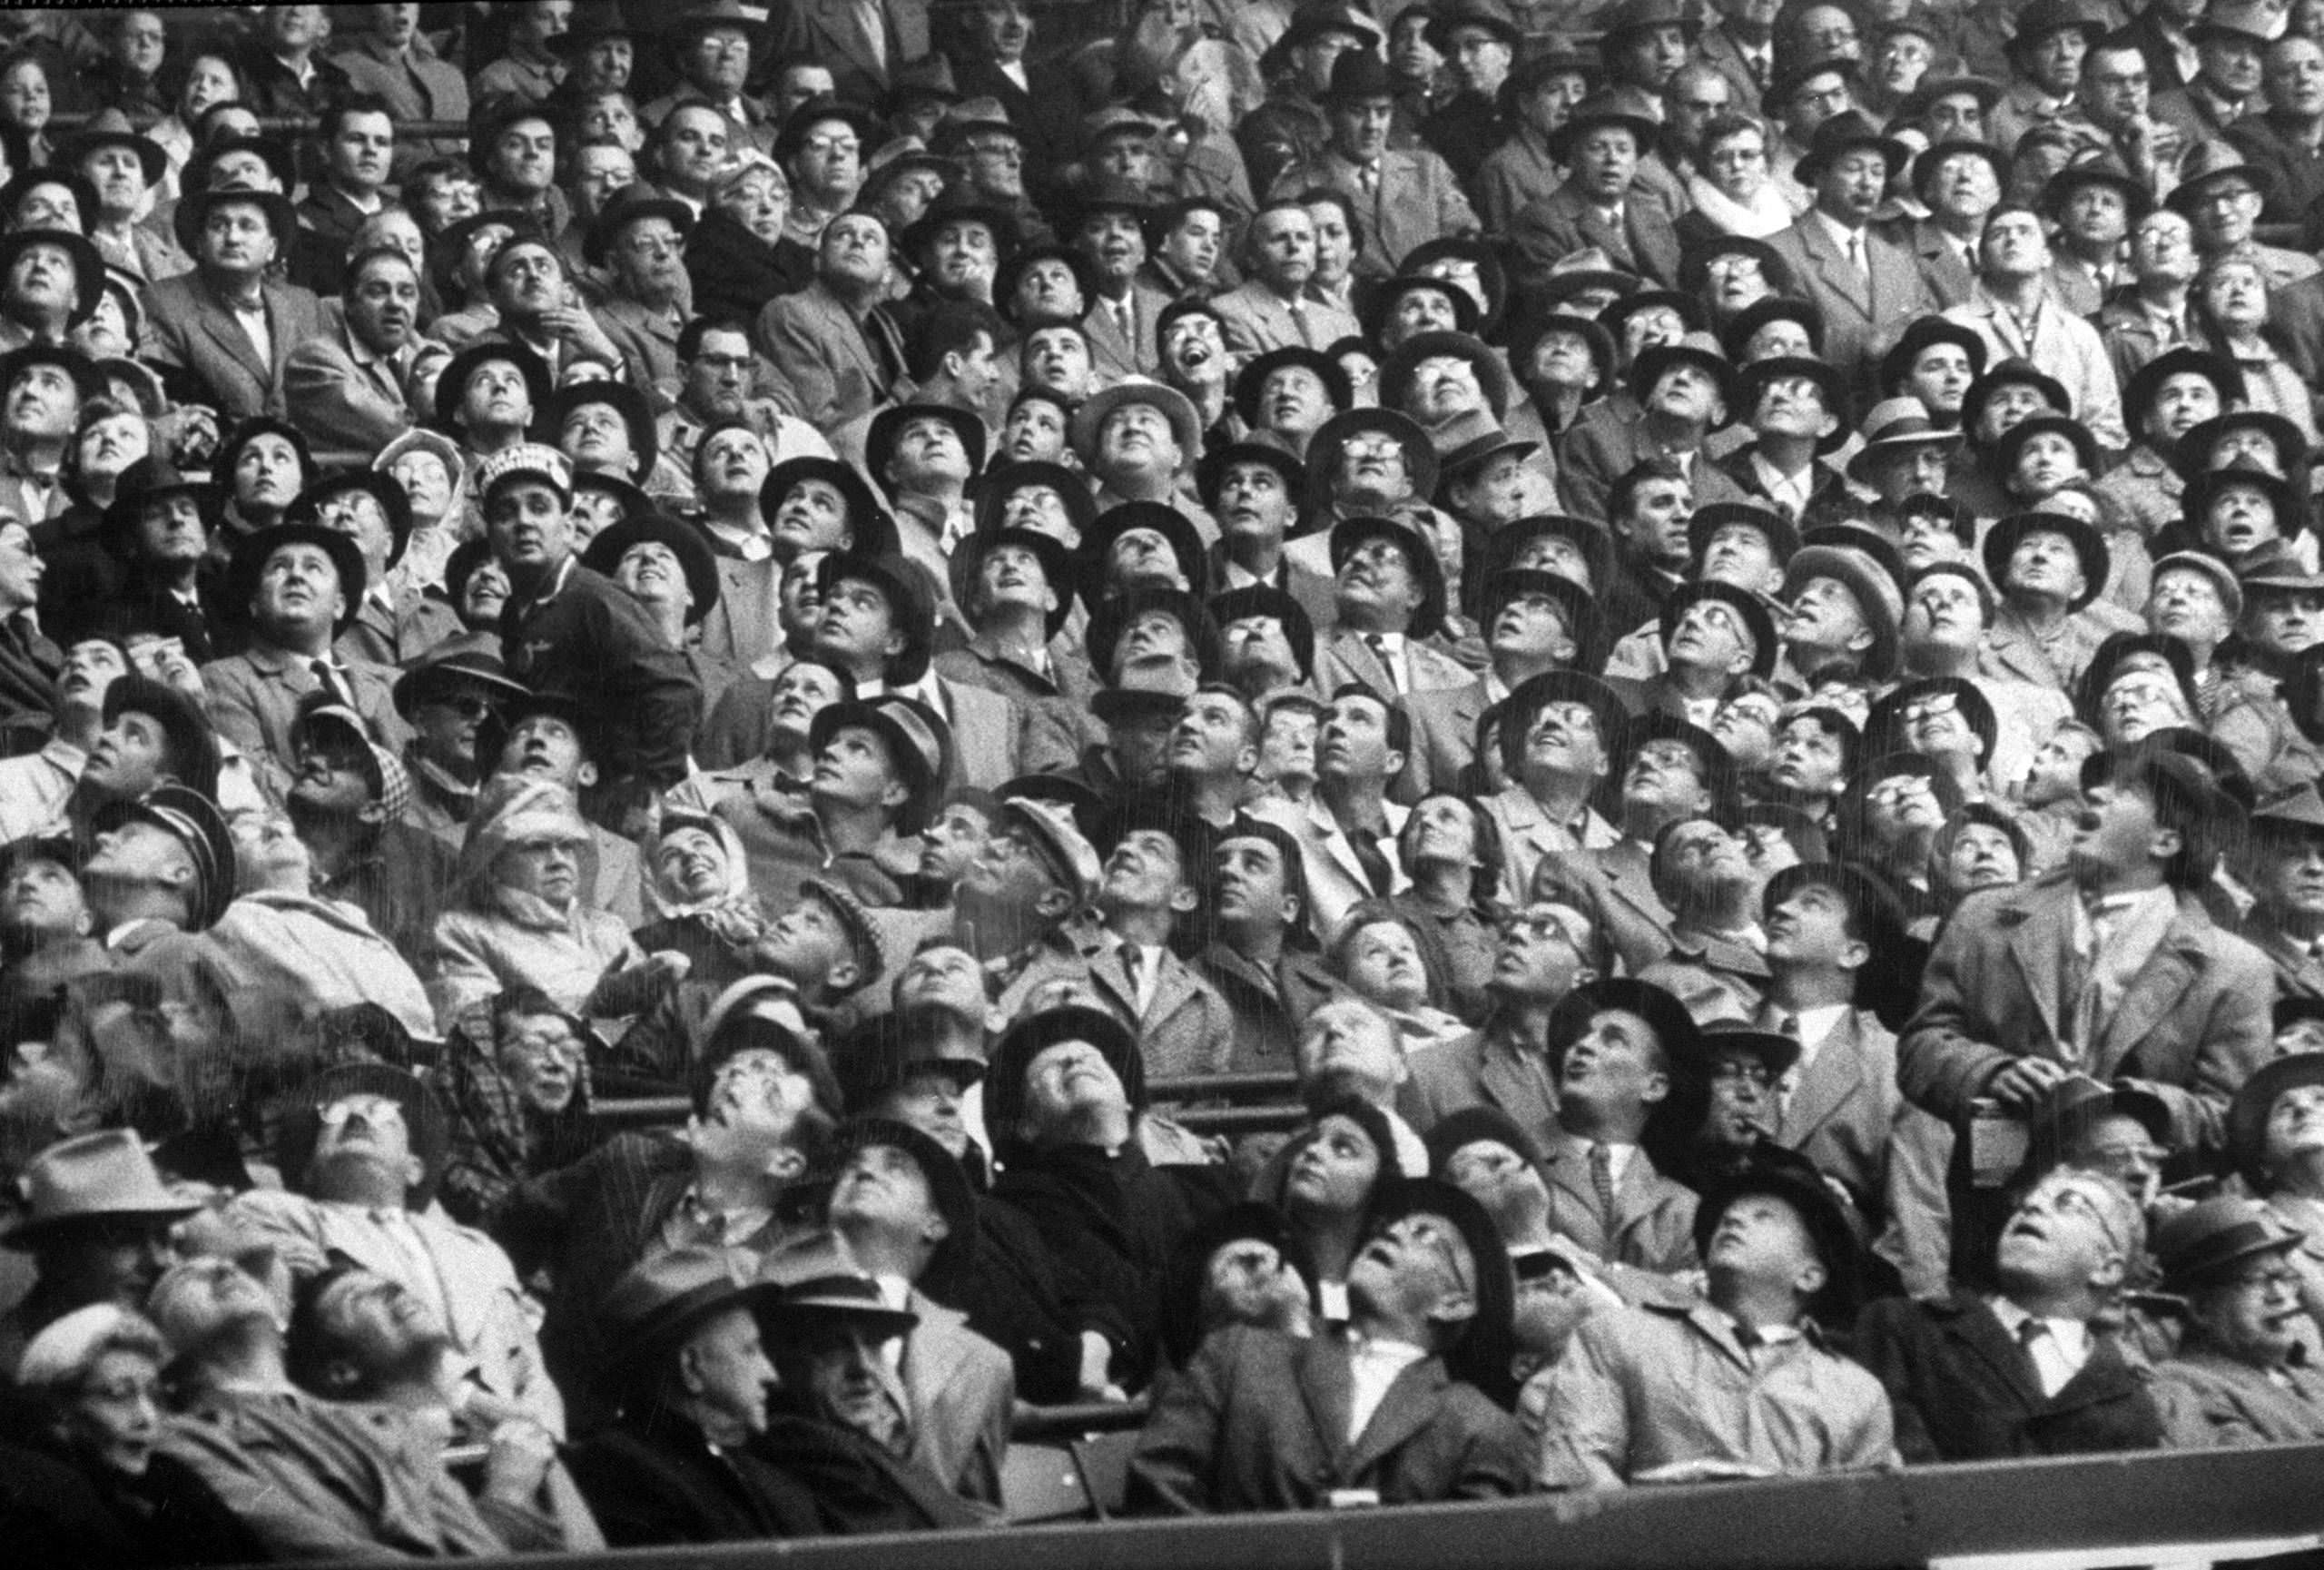 Fans at the opening day of baseball, Milwaukee, 1957